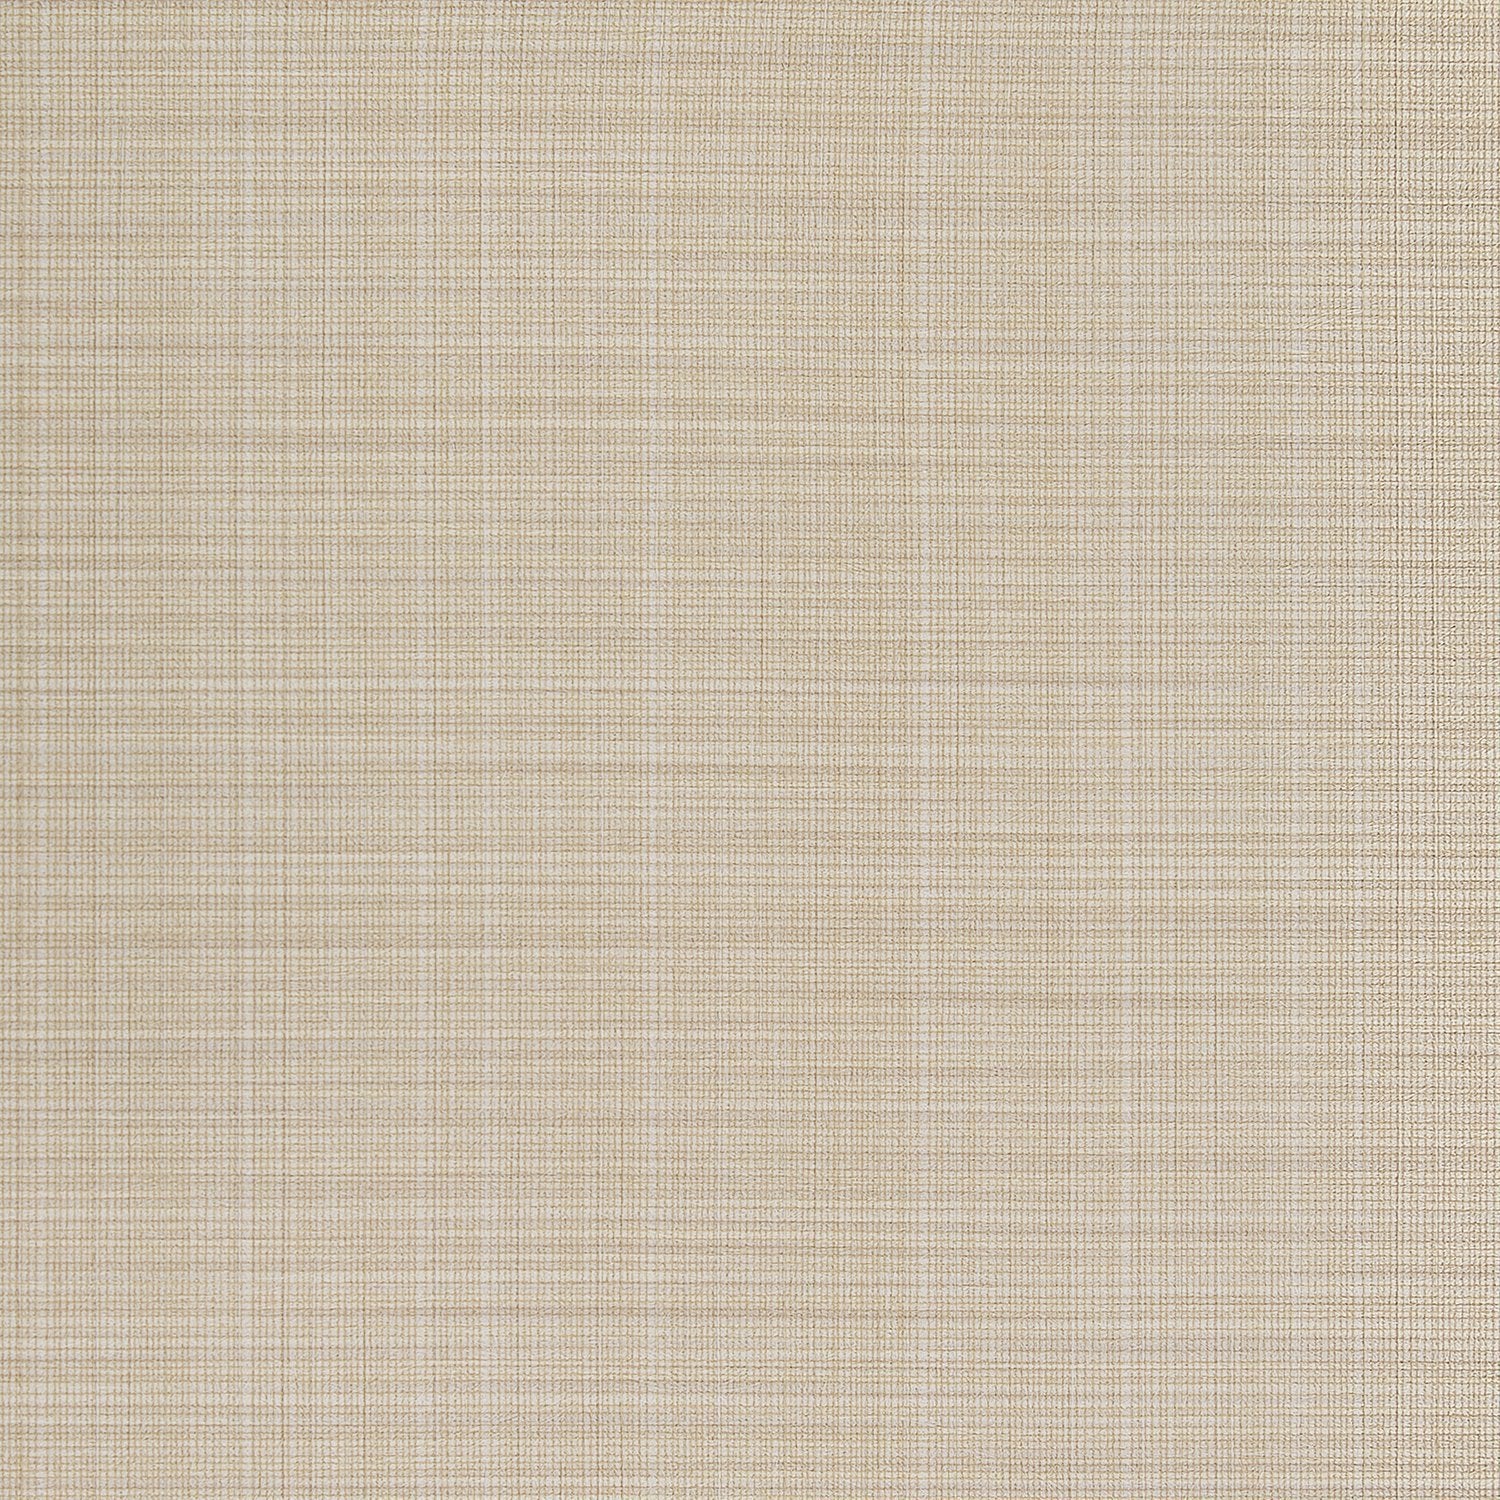 Angles Silk - Y47593 - Wallcovering - Vycon - Kube Contract